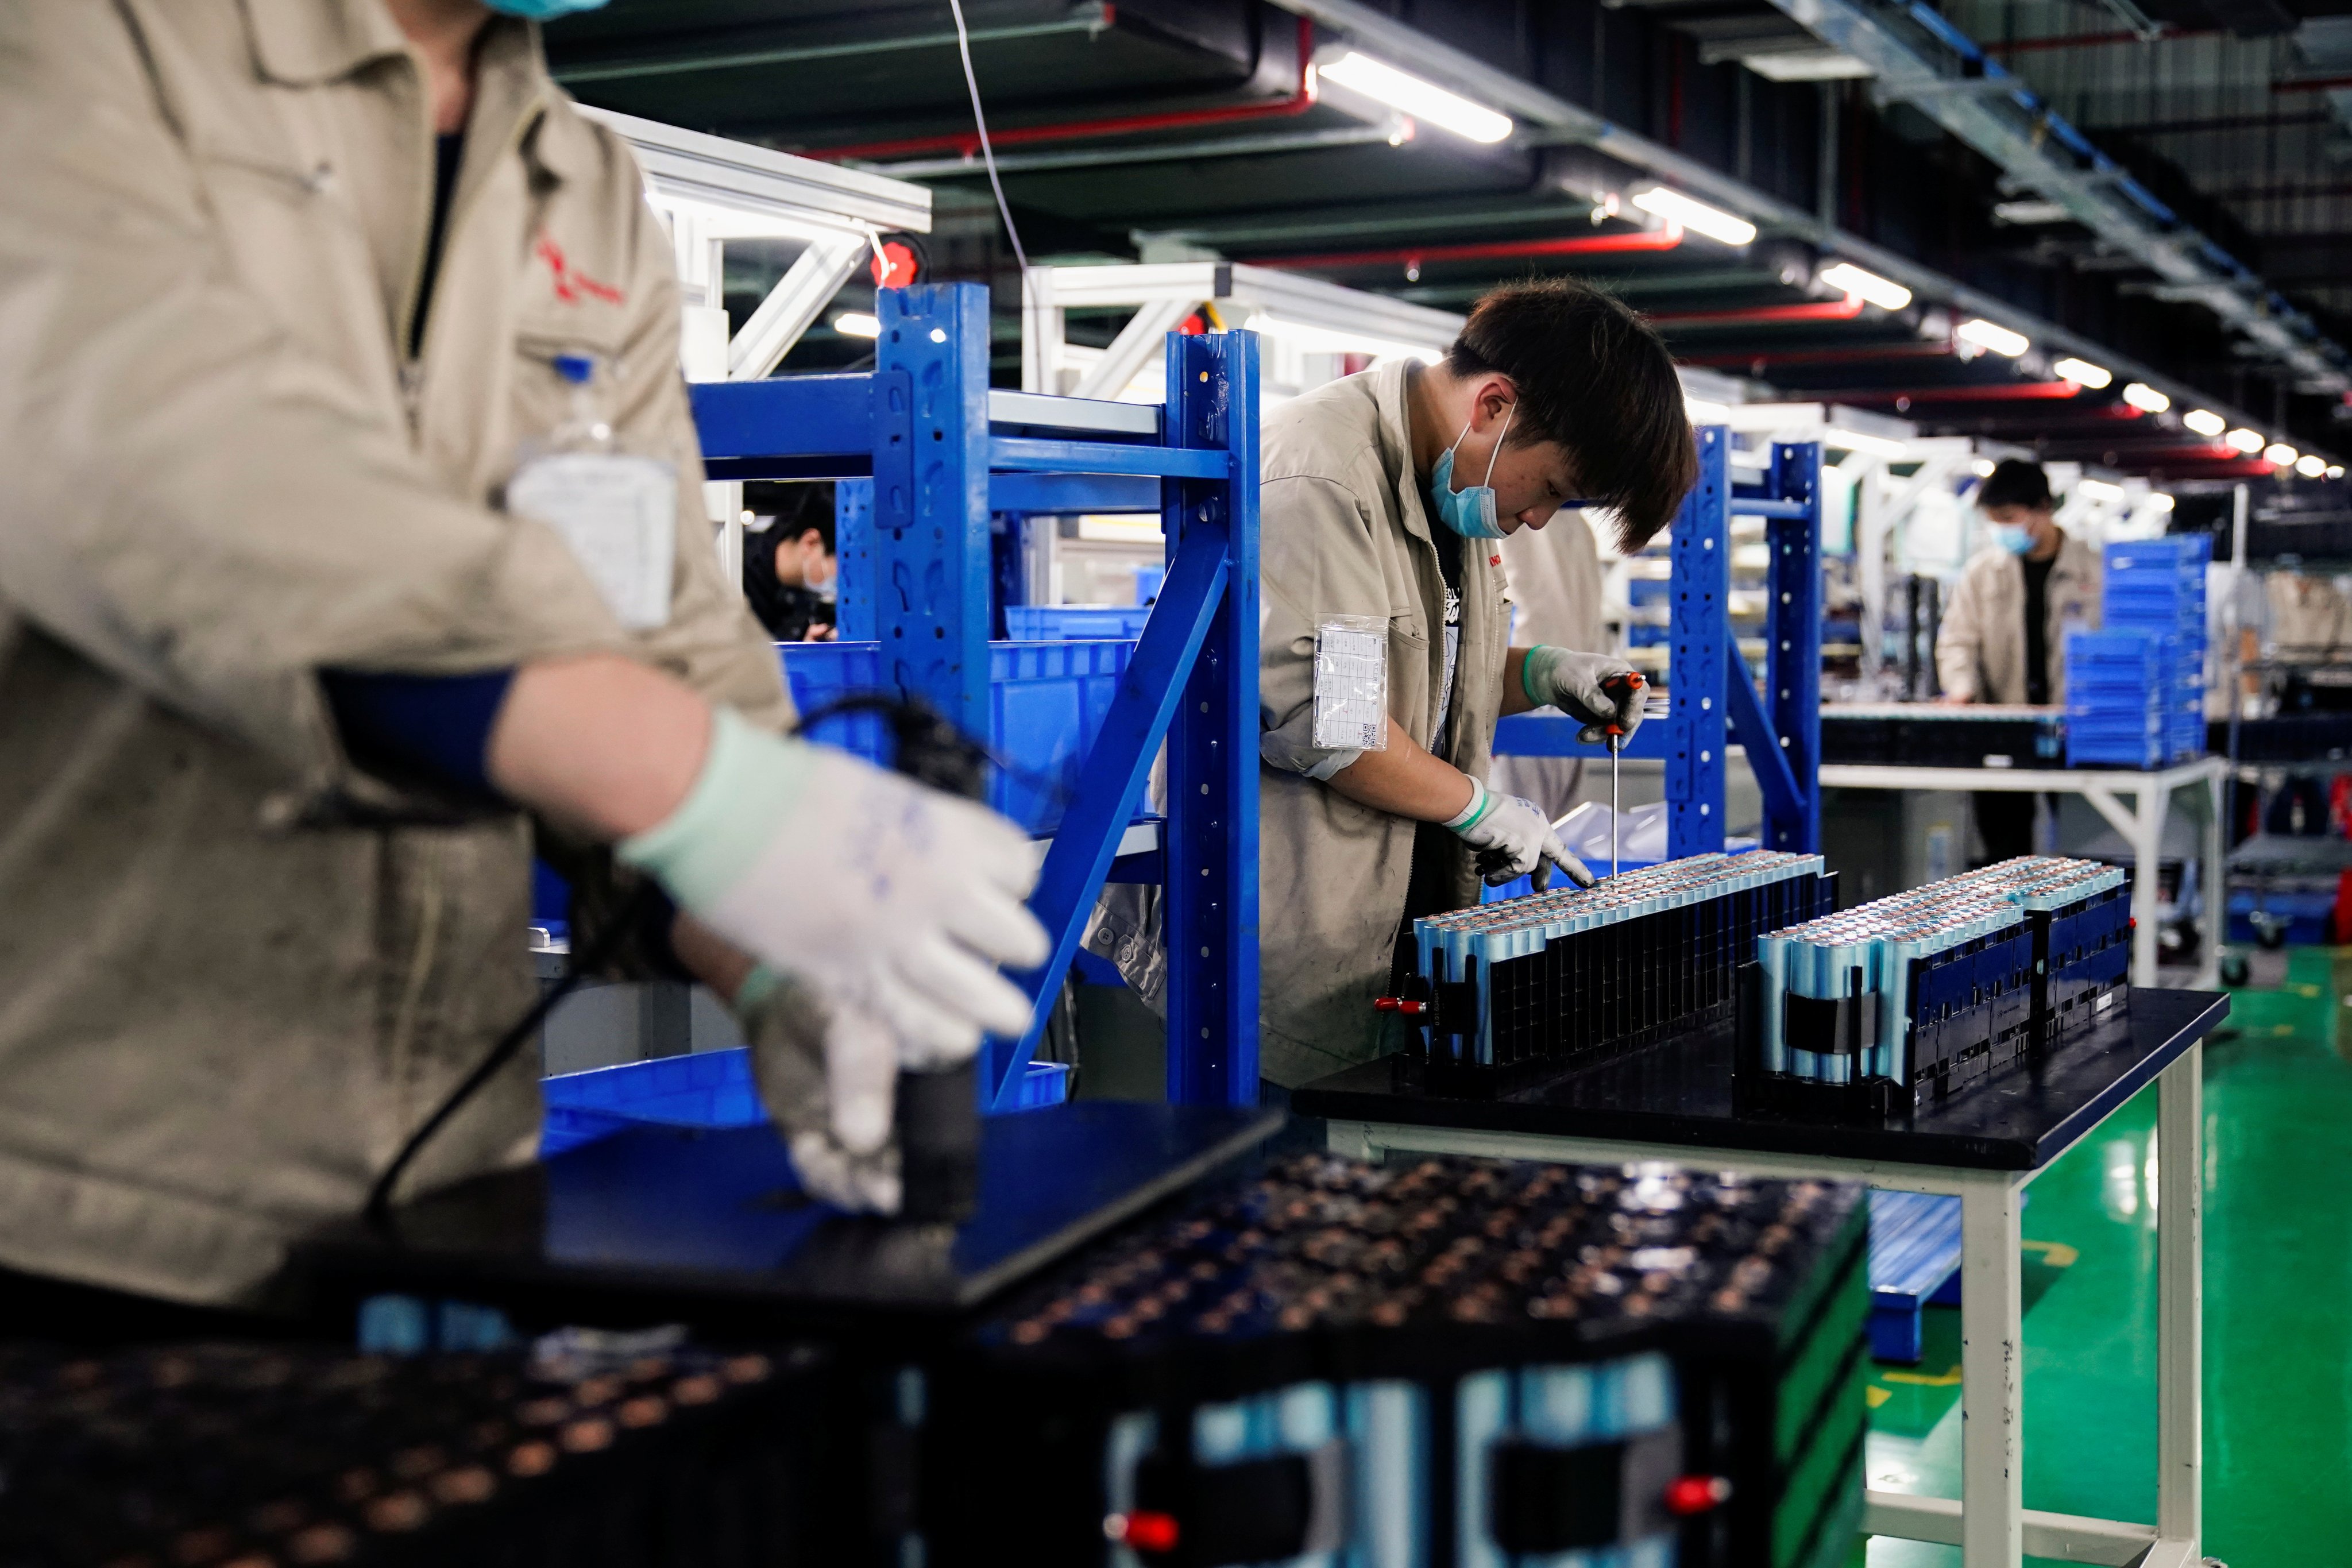 Employees work on the production line of electric vehicle battery manufacturer Octillion in Hefei, Anhui province, China in 2021. China’s dominance of EV battery production has aroused concern in some countries. Photo: Reuters 